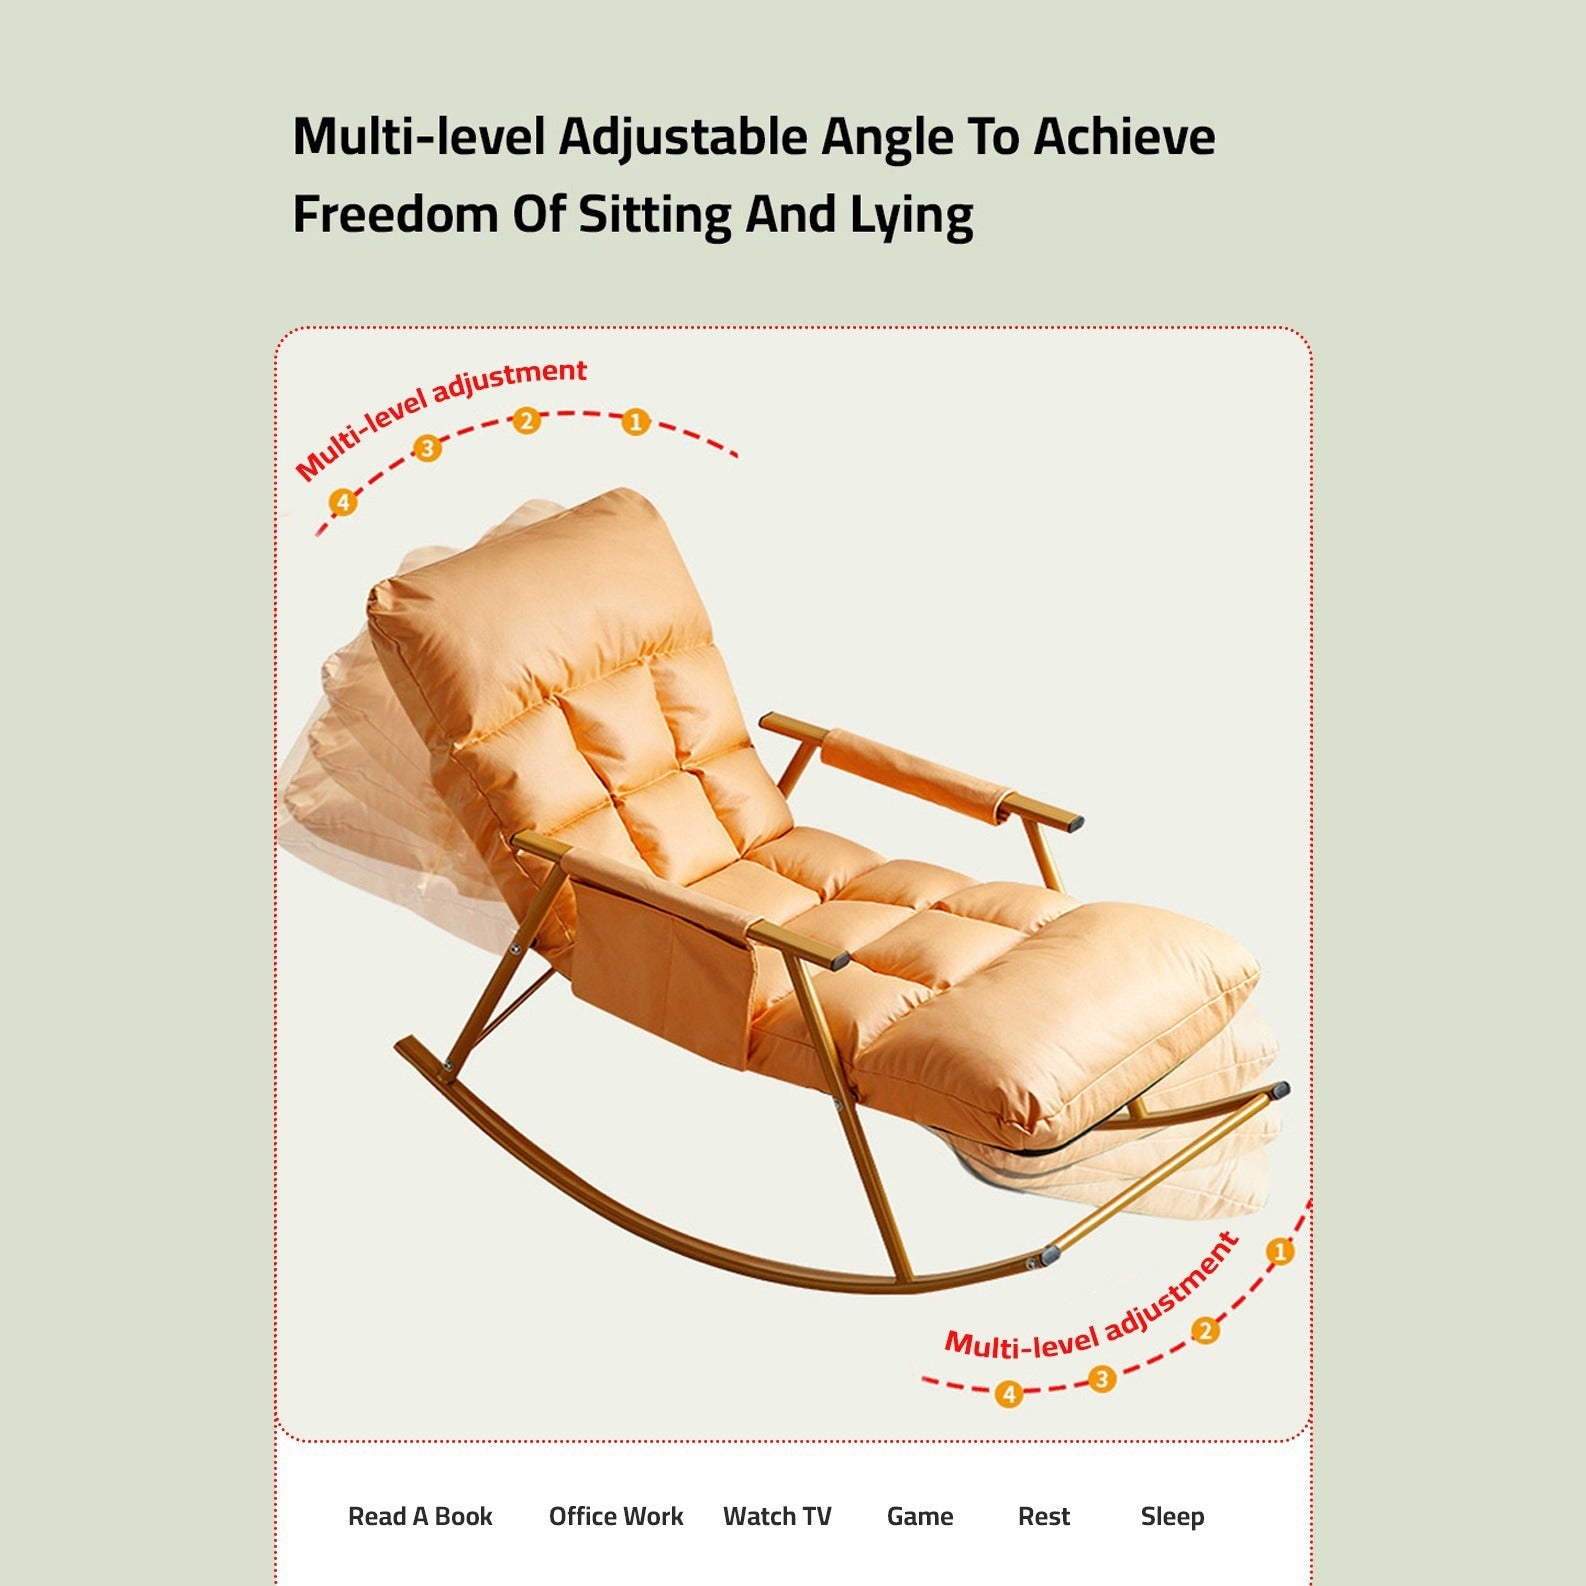 Showing Multi-level Adjustable Angle Feature of rocking chair